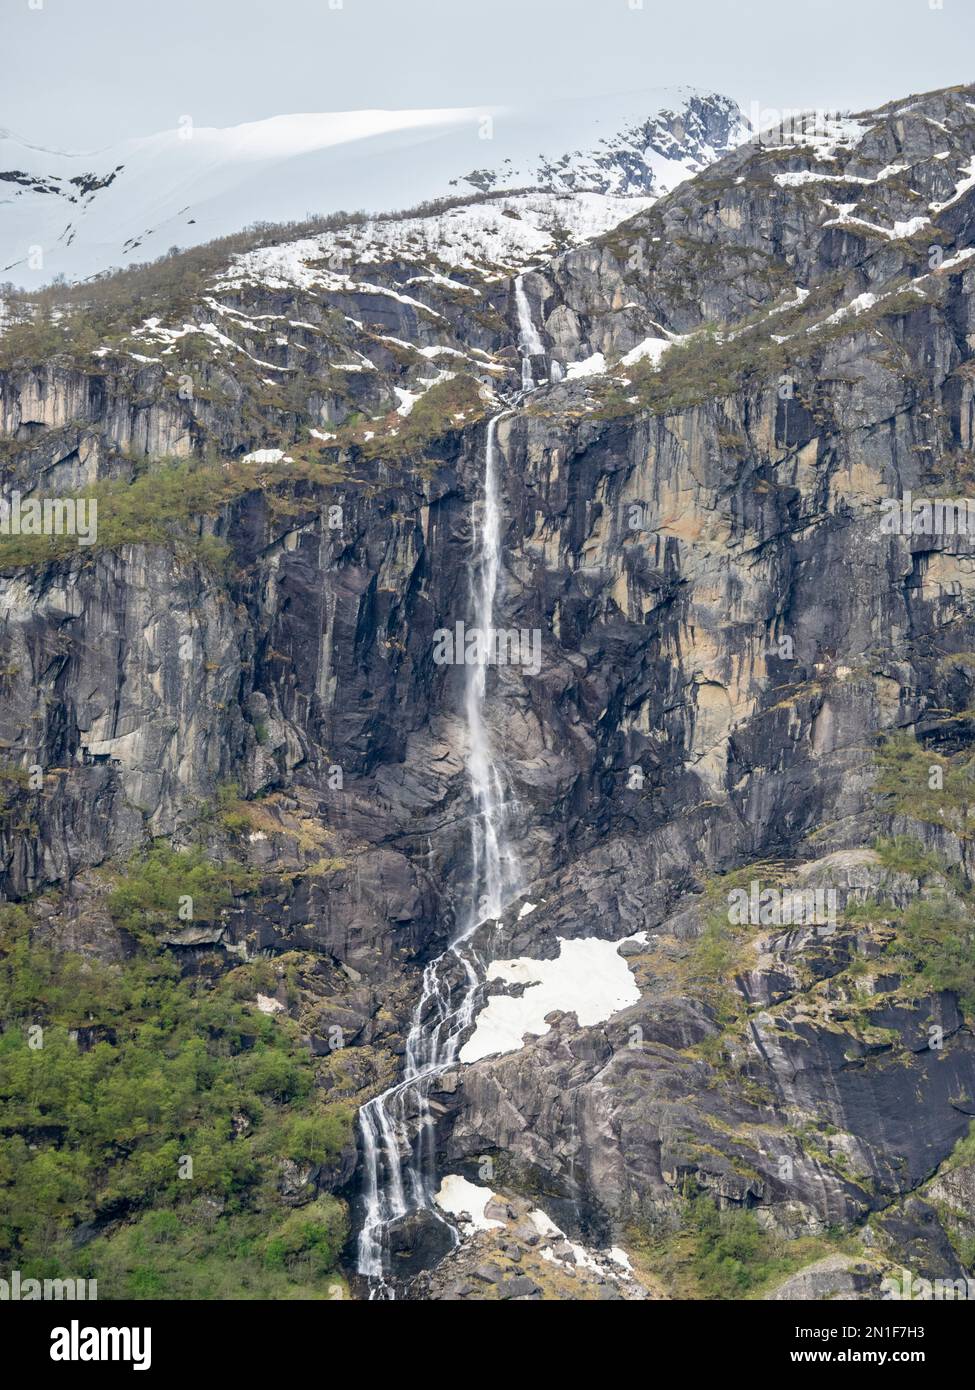 A view of a waterfall on the steep wall of mountains with the Myklebustbreen glacier at the top, Vestland, Norway, Scandinavia, Europe Stock Photo